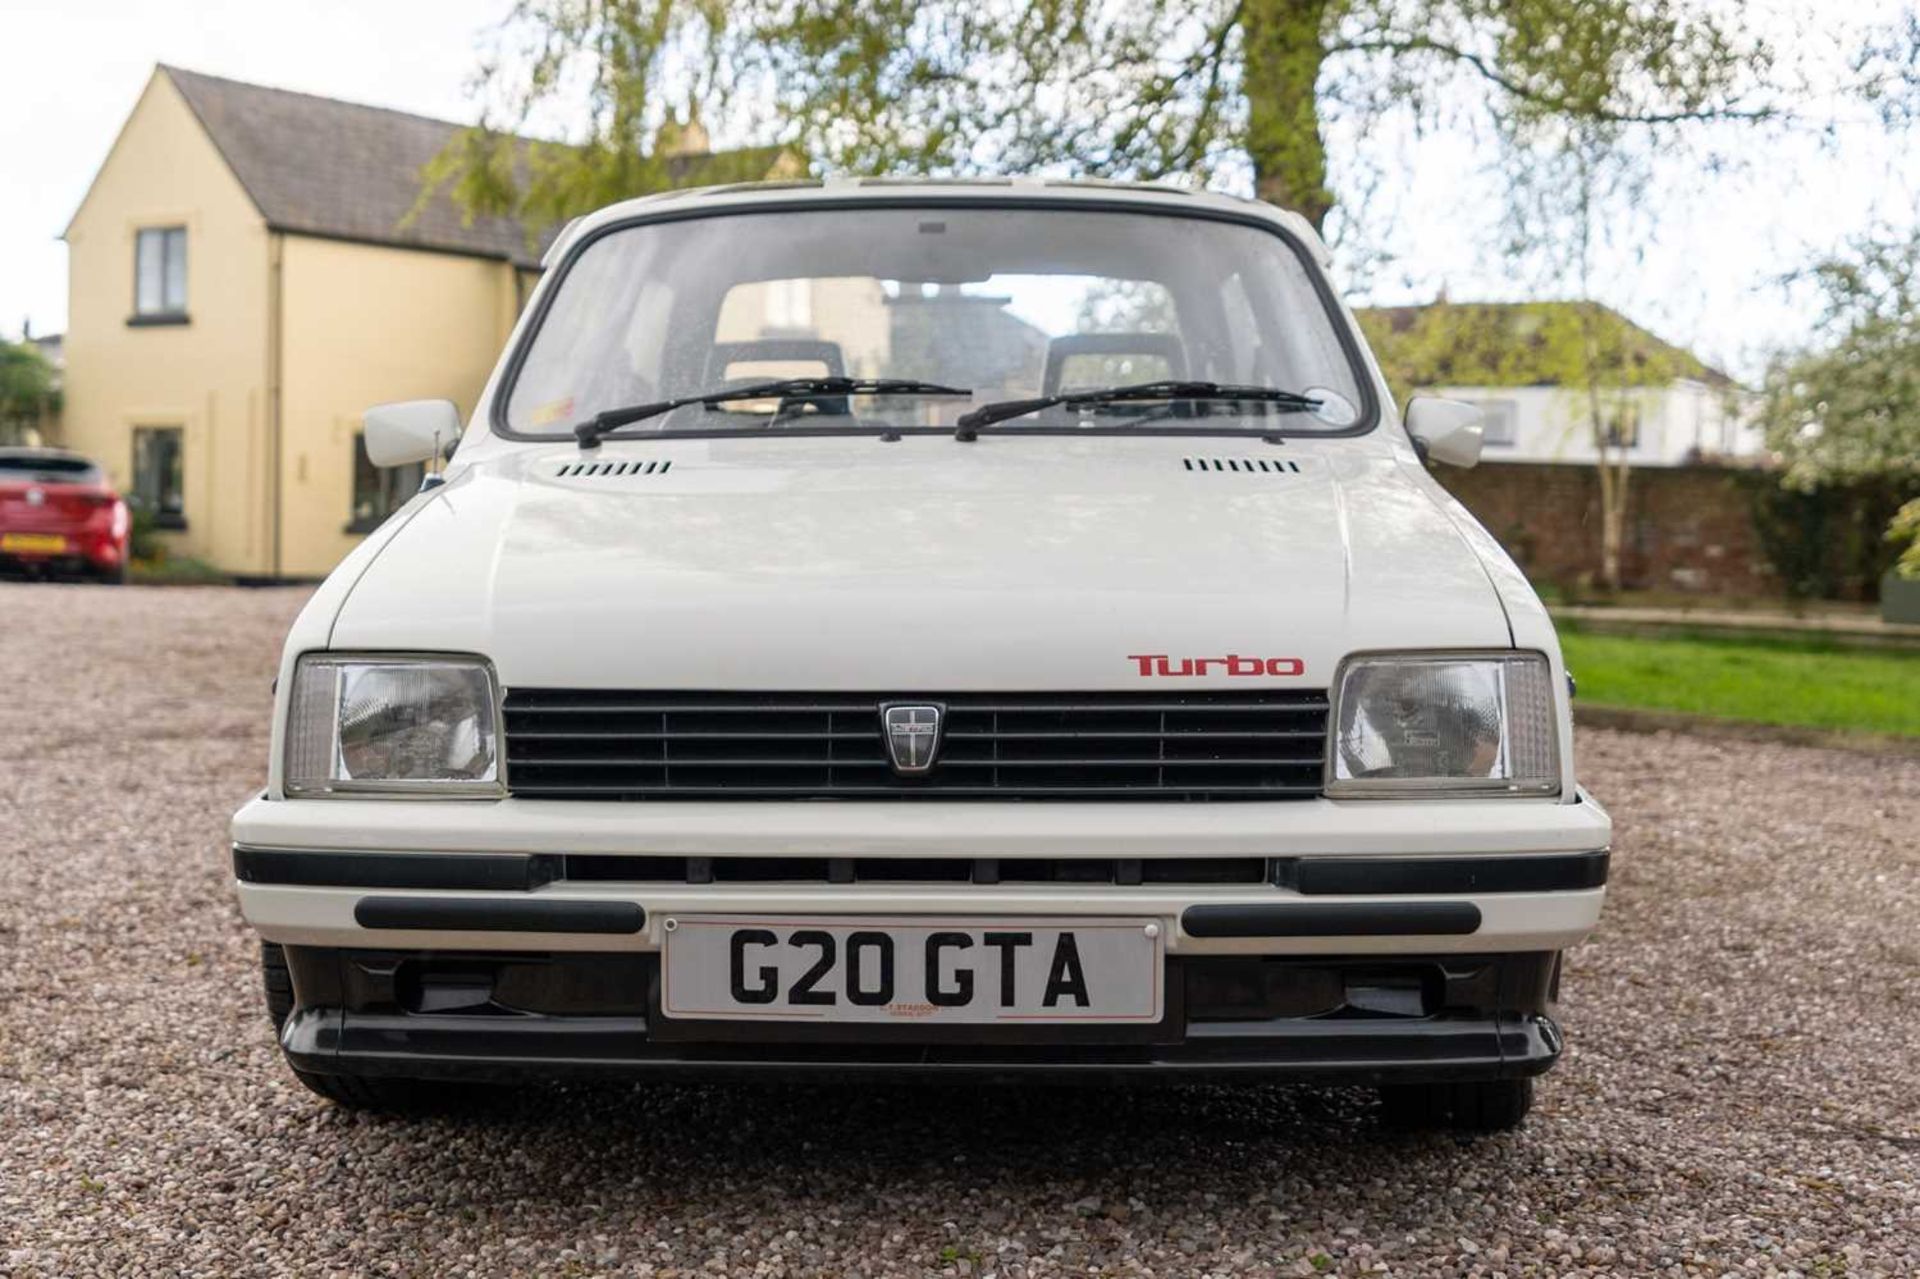 1989 Austin Metro GTa  Offered with the registration ‘G20 GTA’ and a fresh MOT - Image 7 of 53